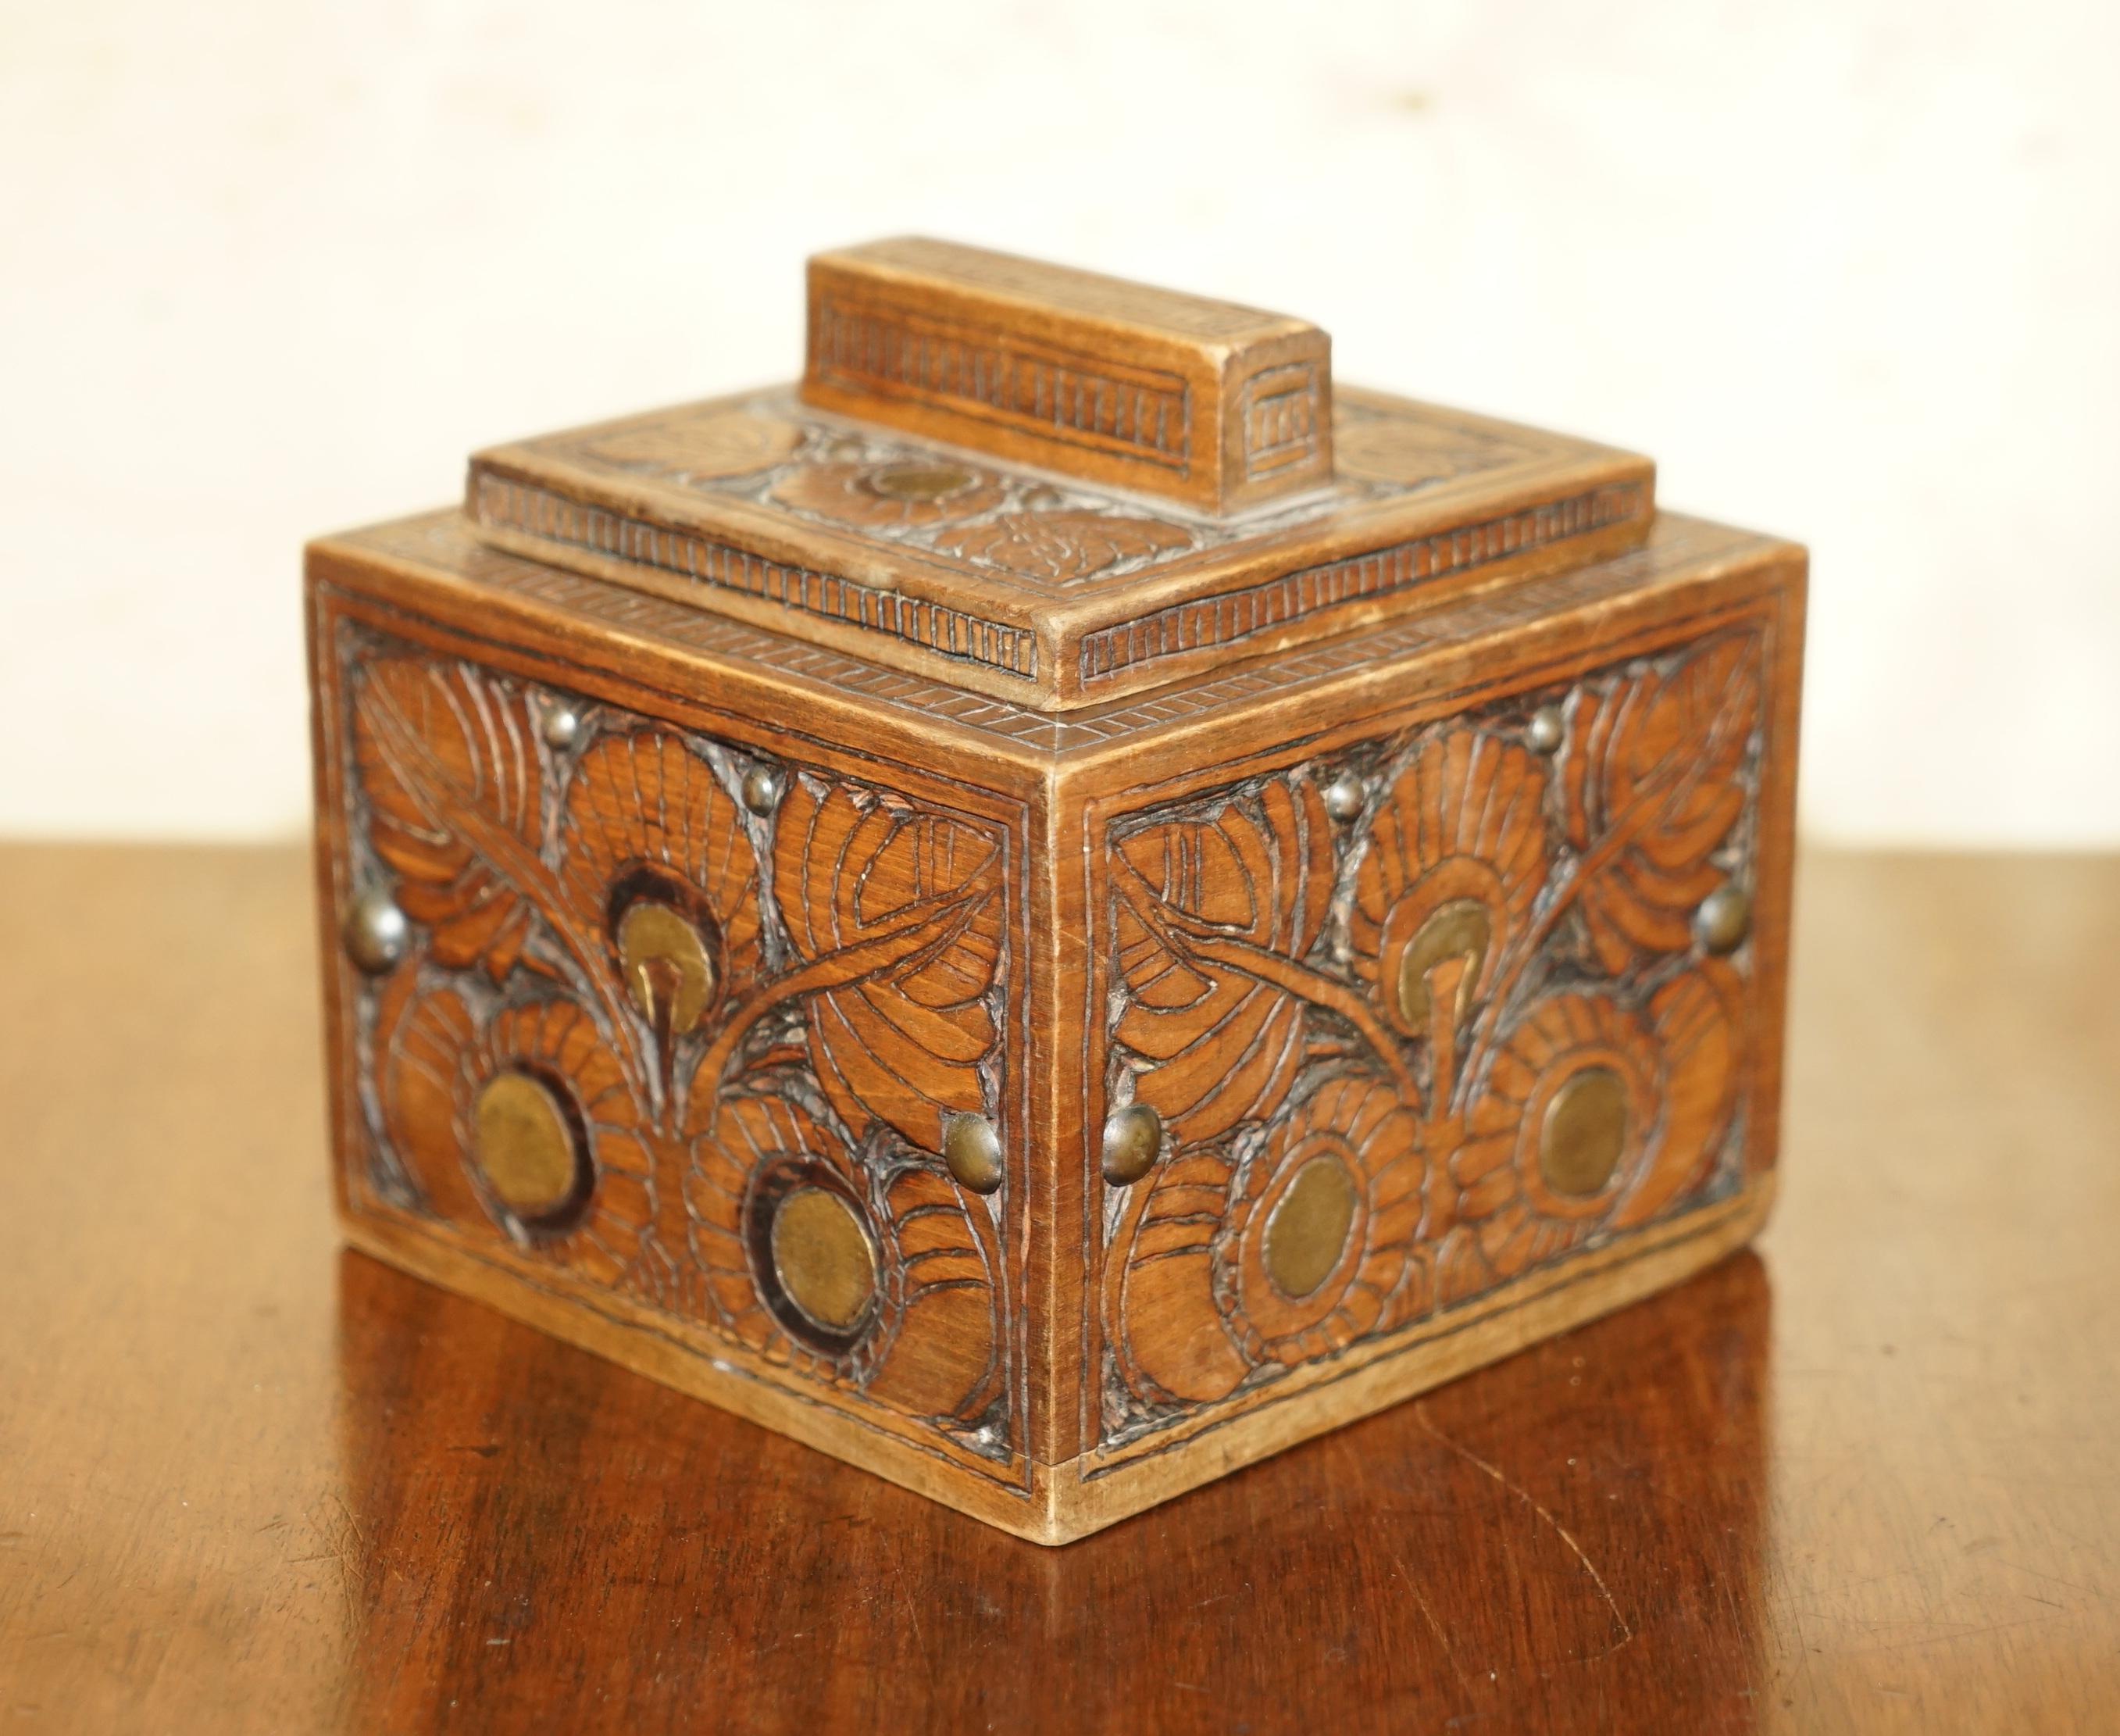 Royal House Antiques

Royal House Antiques is delighted to offer for sale this little wooden trinket box with antiqued studs and gold leaf detailing

A good little box, ideal for jewellery and so on

Condition wise we have cleaned waxed and polished